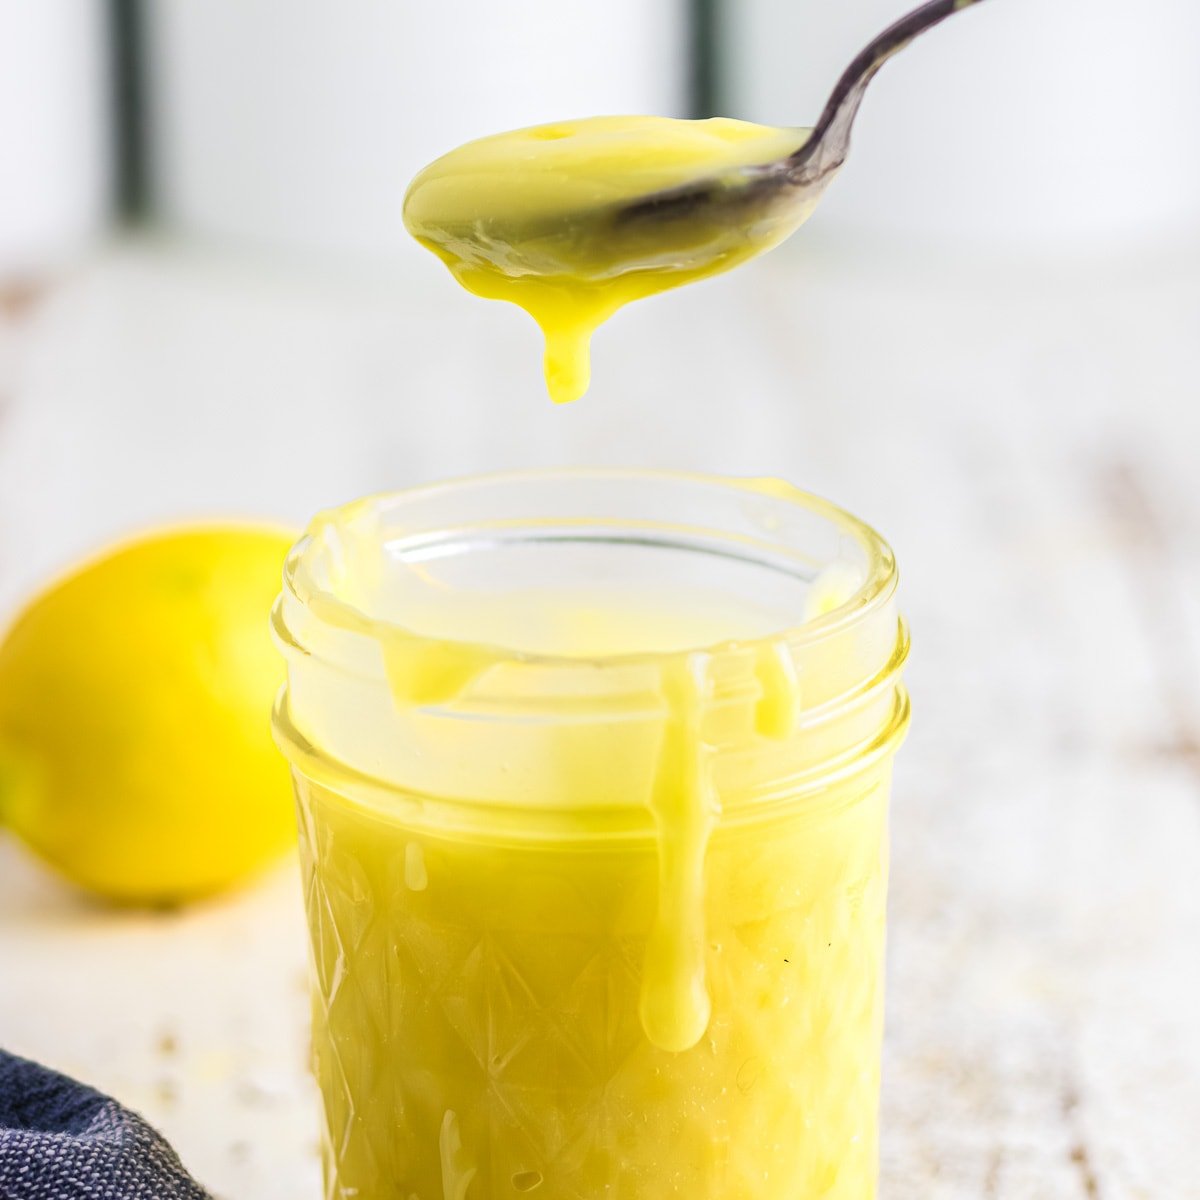 A spoonful of lemon curd being lifted from the jar.